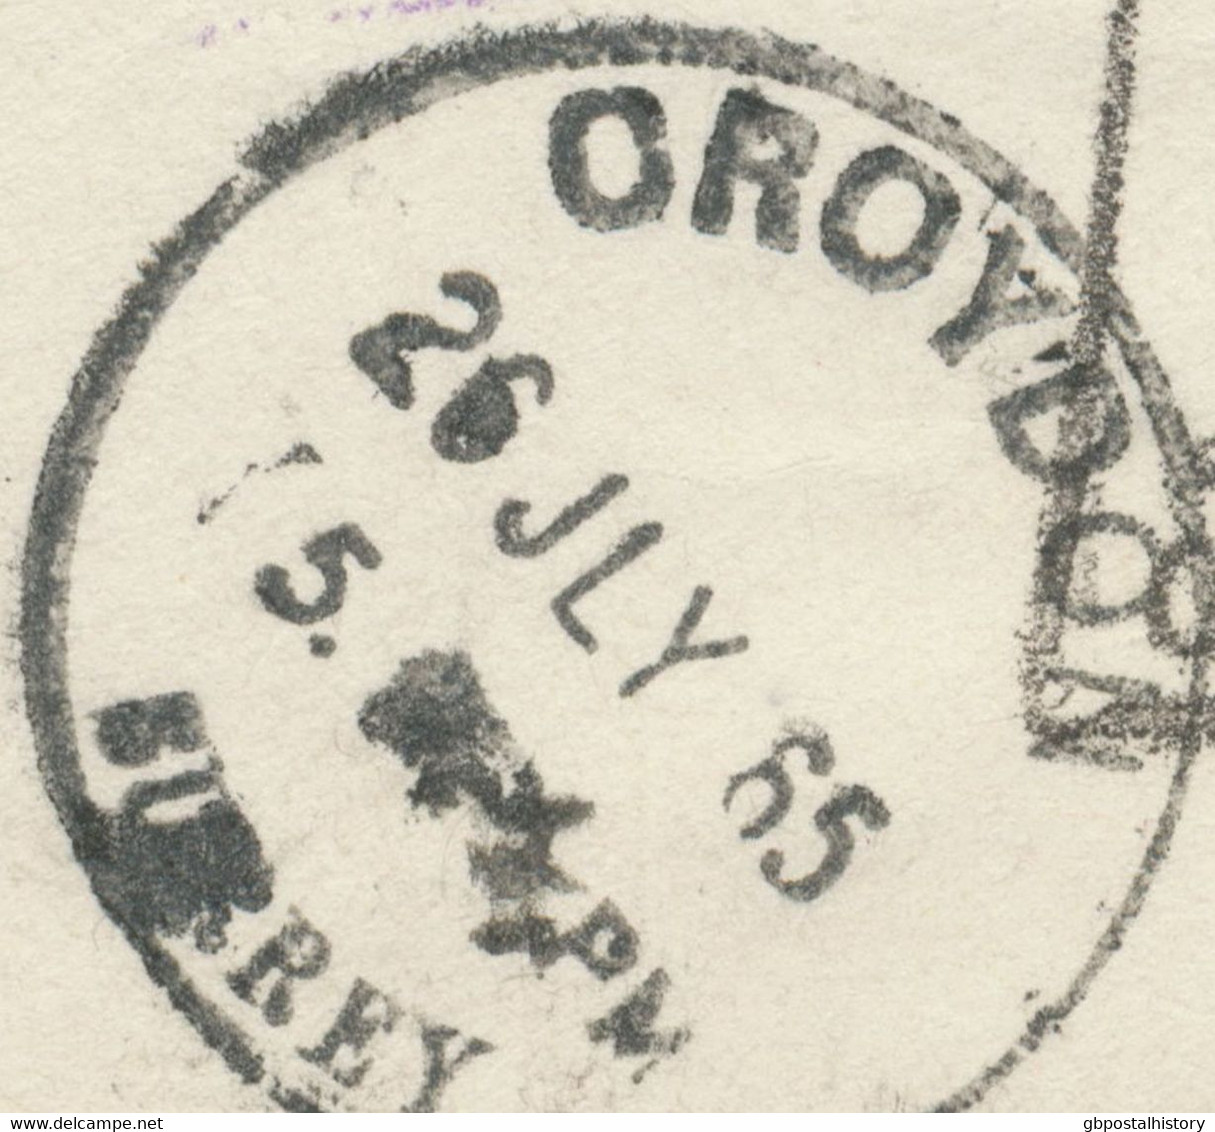 GB 1965 Superb Unpaid Cover W Skeleton Postmark „CROYDON / SURREY“ (29mm), Also Postage Due 6d CHARGE NOT COLLECTED - Portomarken